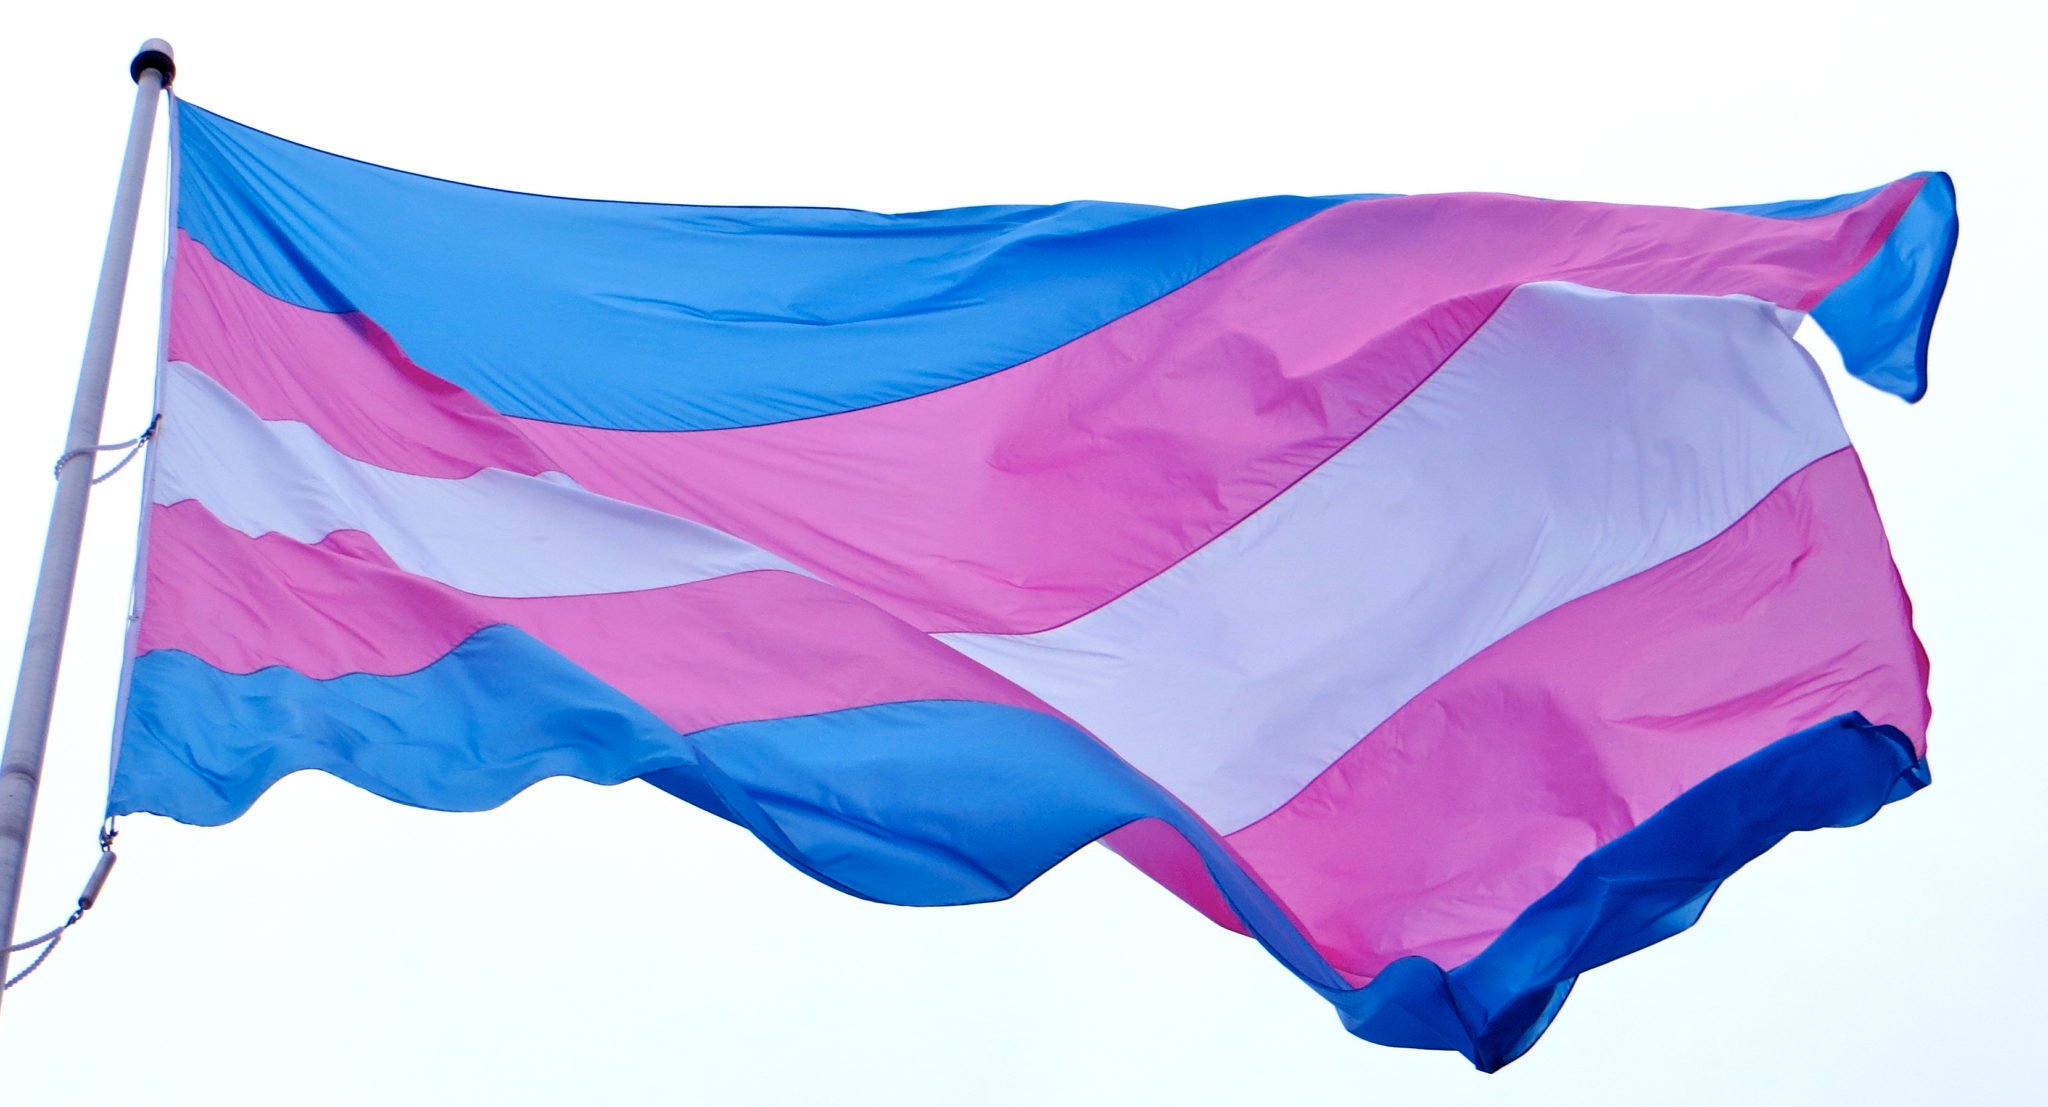 The blue and pink transgender pride and rights flag.